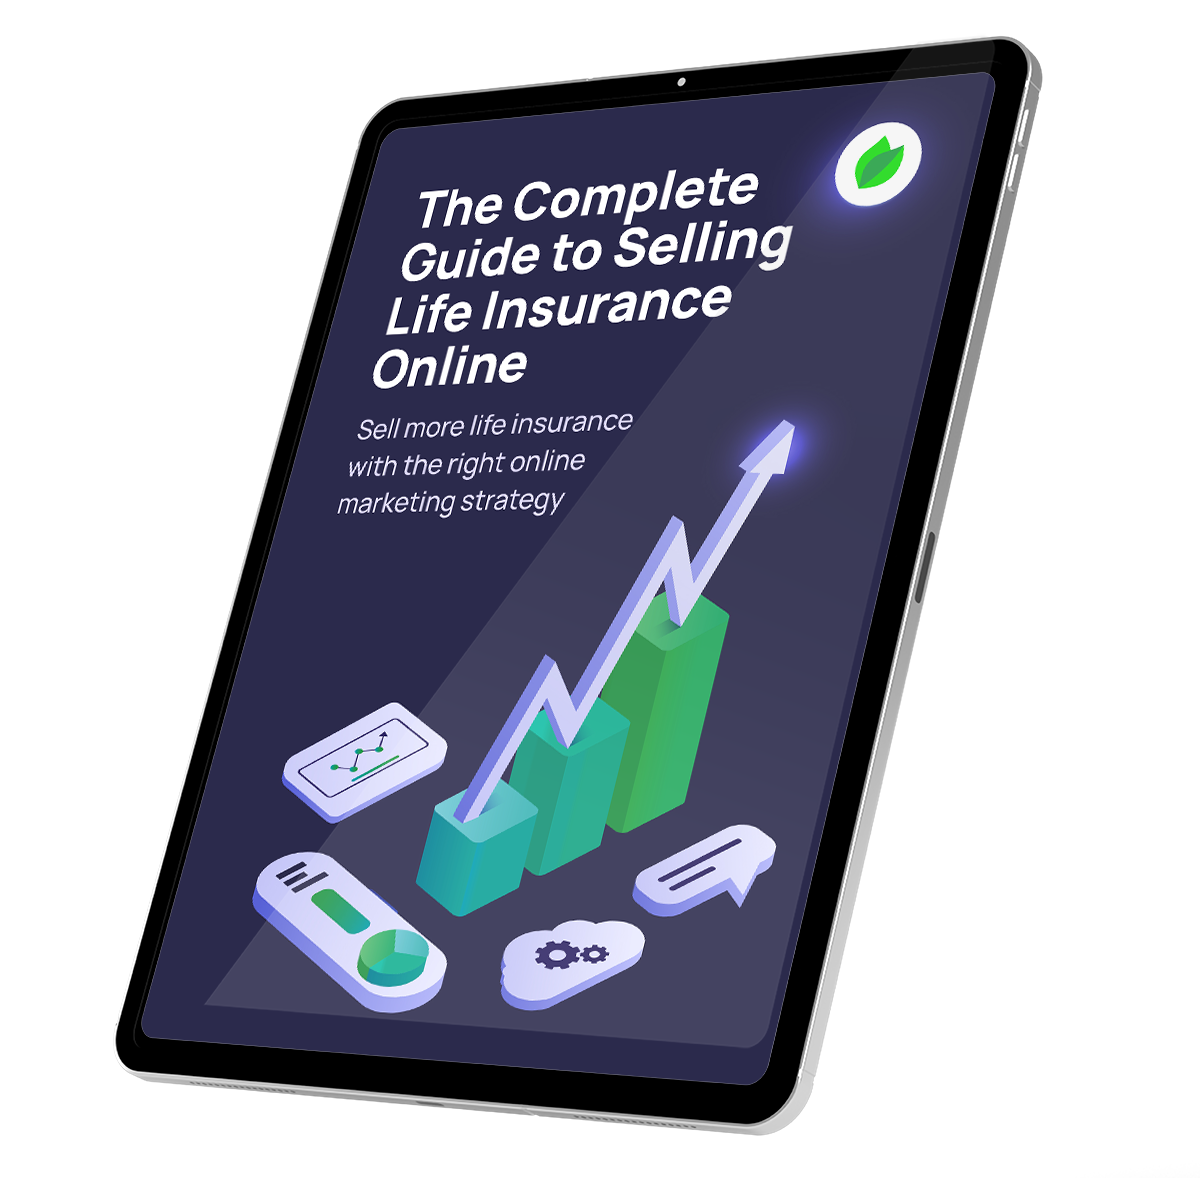 Get our free eBook